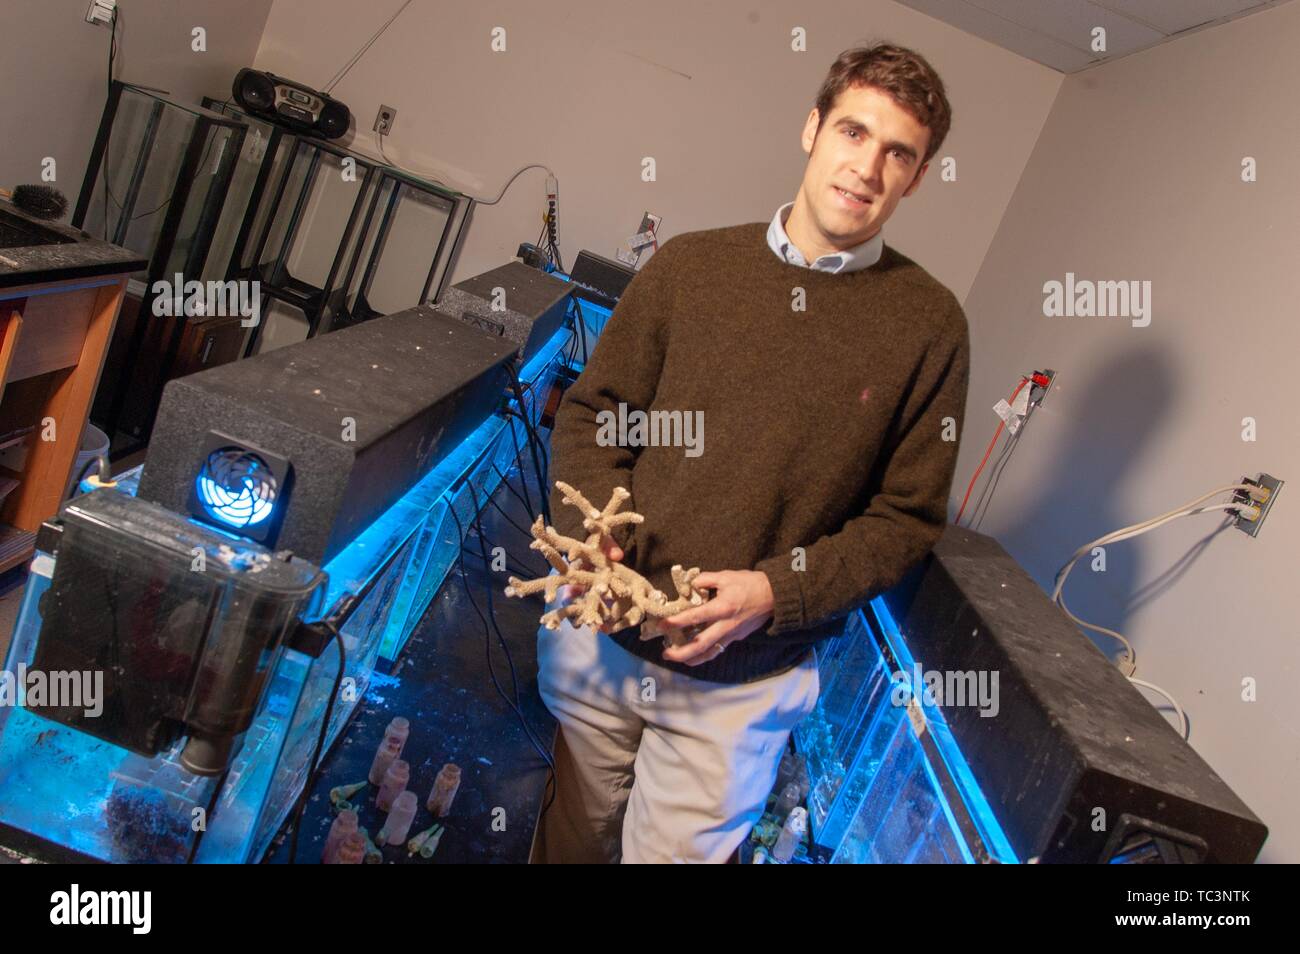 Angled shot of marine scientist Justin Ries, standing and facing the camera while holding a piece of coral, likely at the Johns Hopkins University, Baltimore, Maryland, November 3, 2004. From the Homewood Photography Collection. () Stock Photo